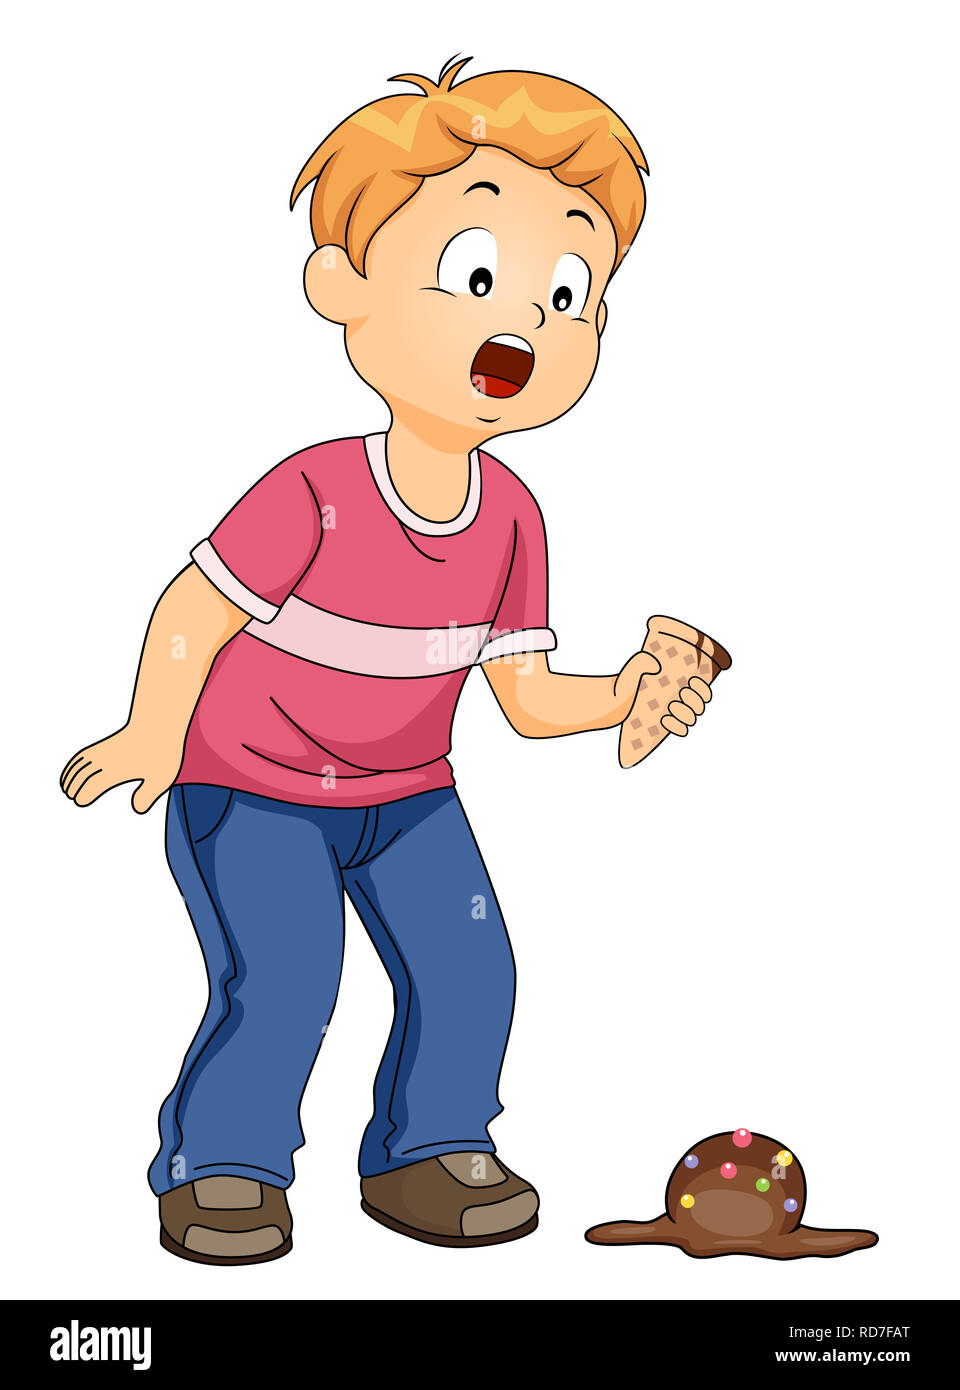 Illustration of a Clumsy Kid Boy Dropping His Ice Cream on the Floor and Left Holding the Cone Stock Photo